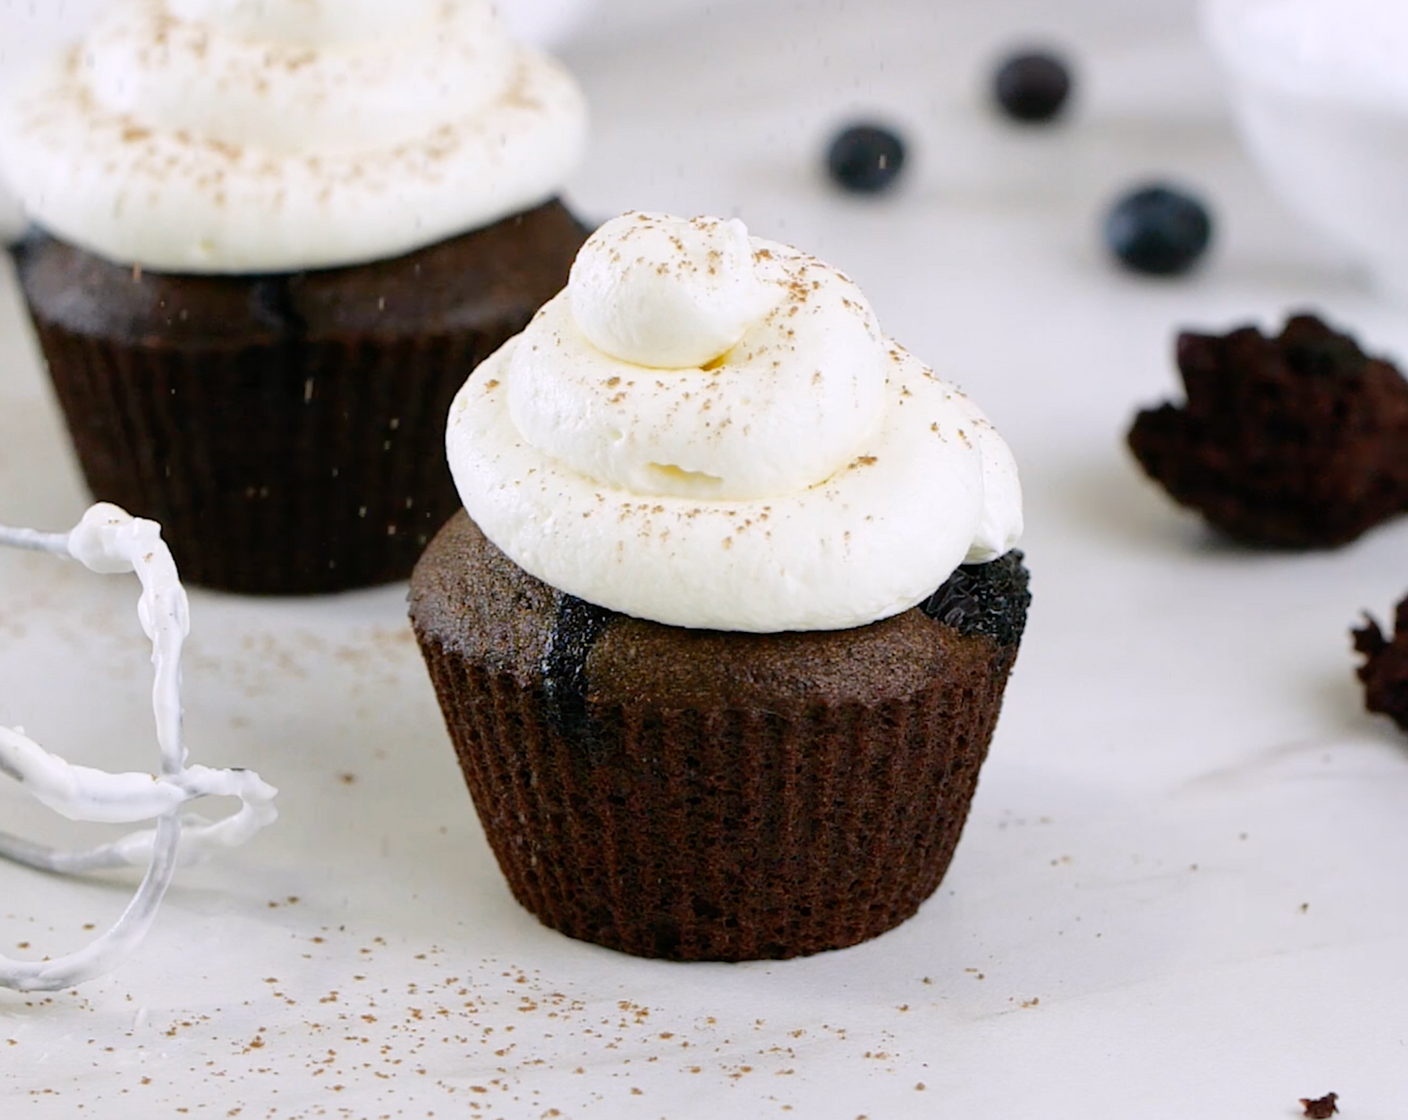 Chocolate Blueberry Cupcakes with Cream Cheese Topping